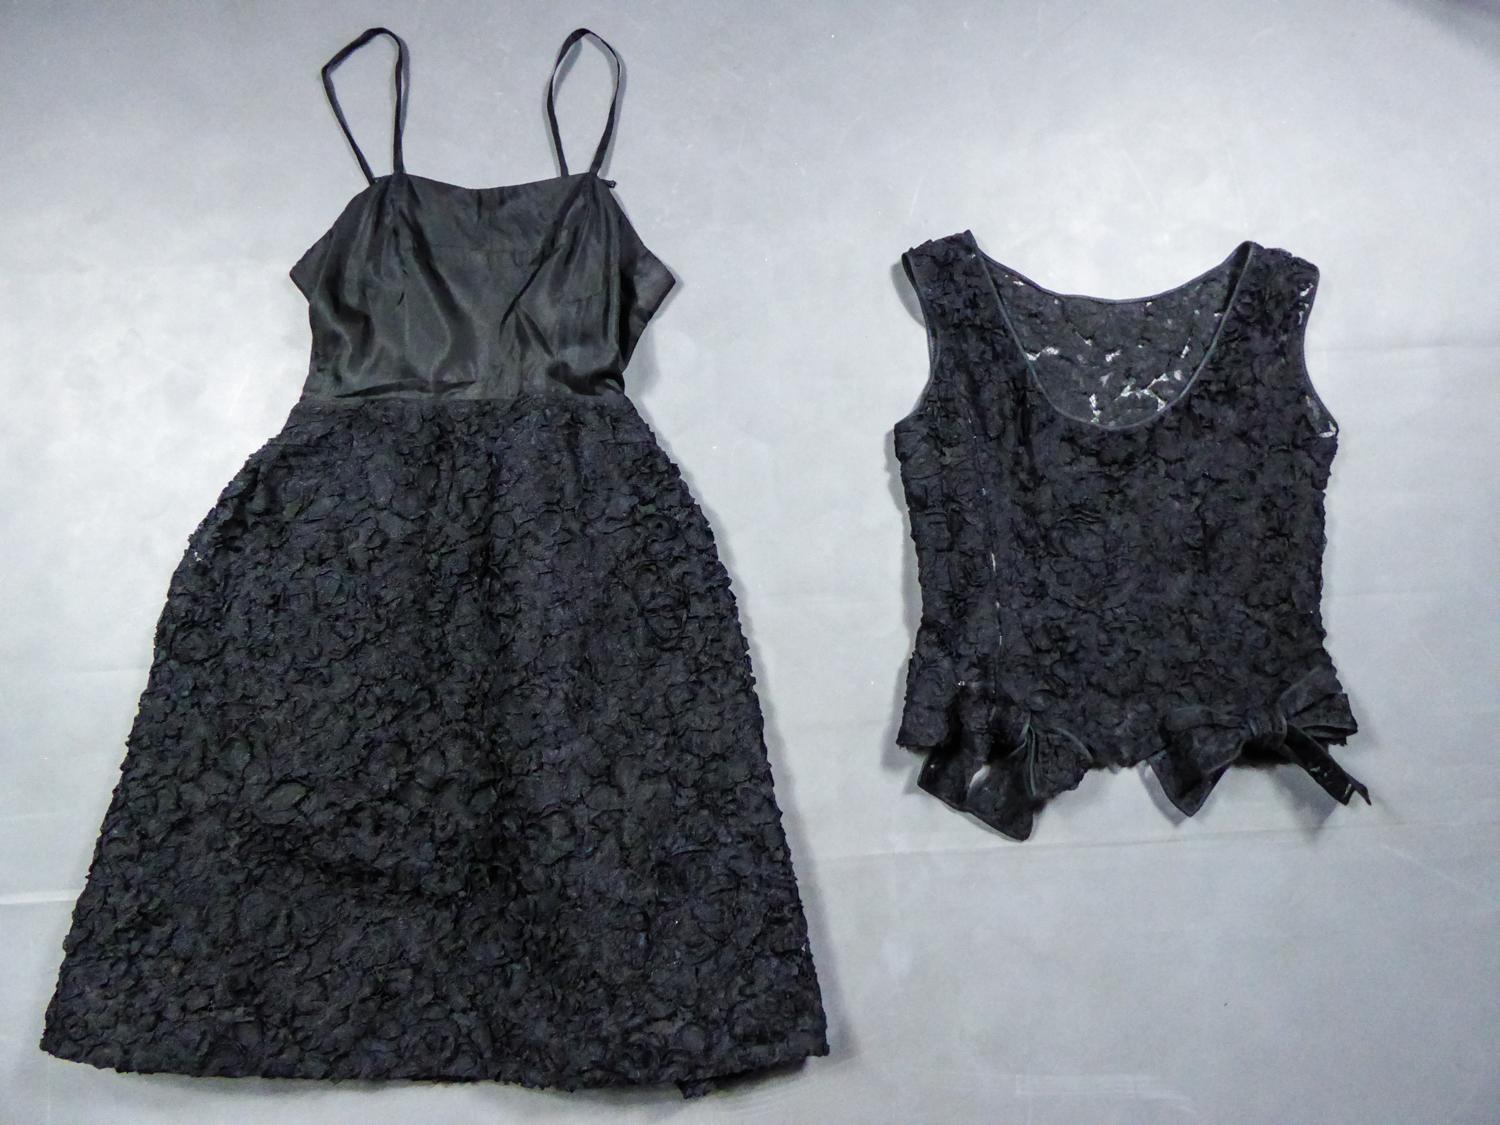 Circa 1960
France

A Nina Ricci Haute Couture little black evening dress in guipure lace embroidered with black laces from the 1960s. Dress composed of two parts: a sleeveless top with boat neckline and two knots on the kidneys. This top closing at